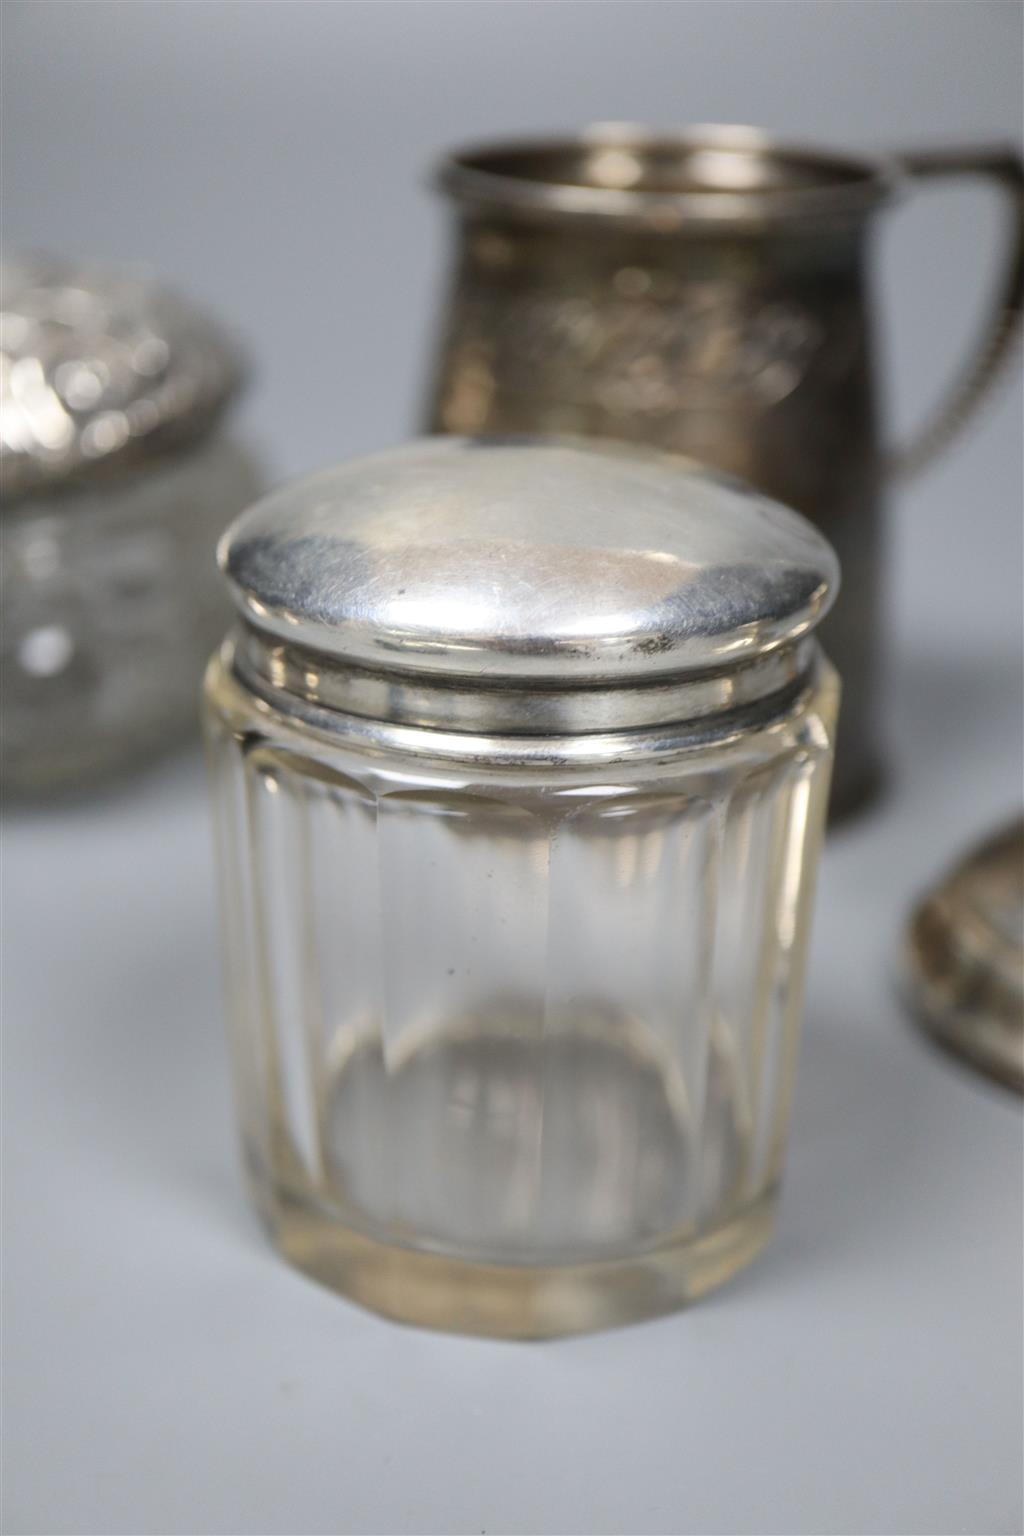 A silver Christening mug, a pair of silver seal top spoons and sundry silver,